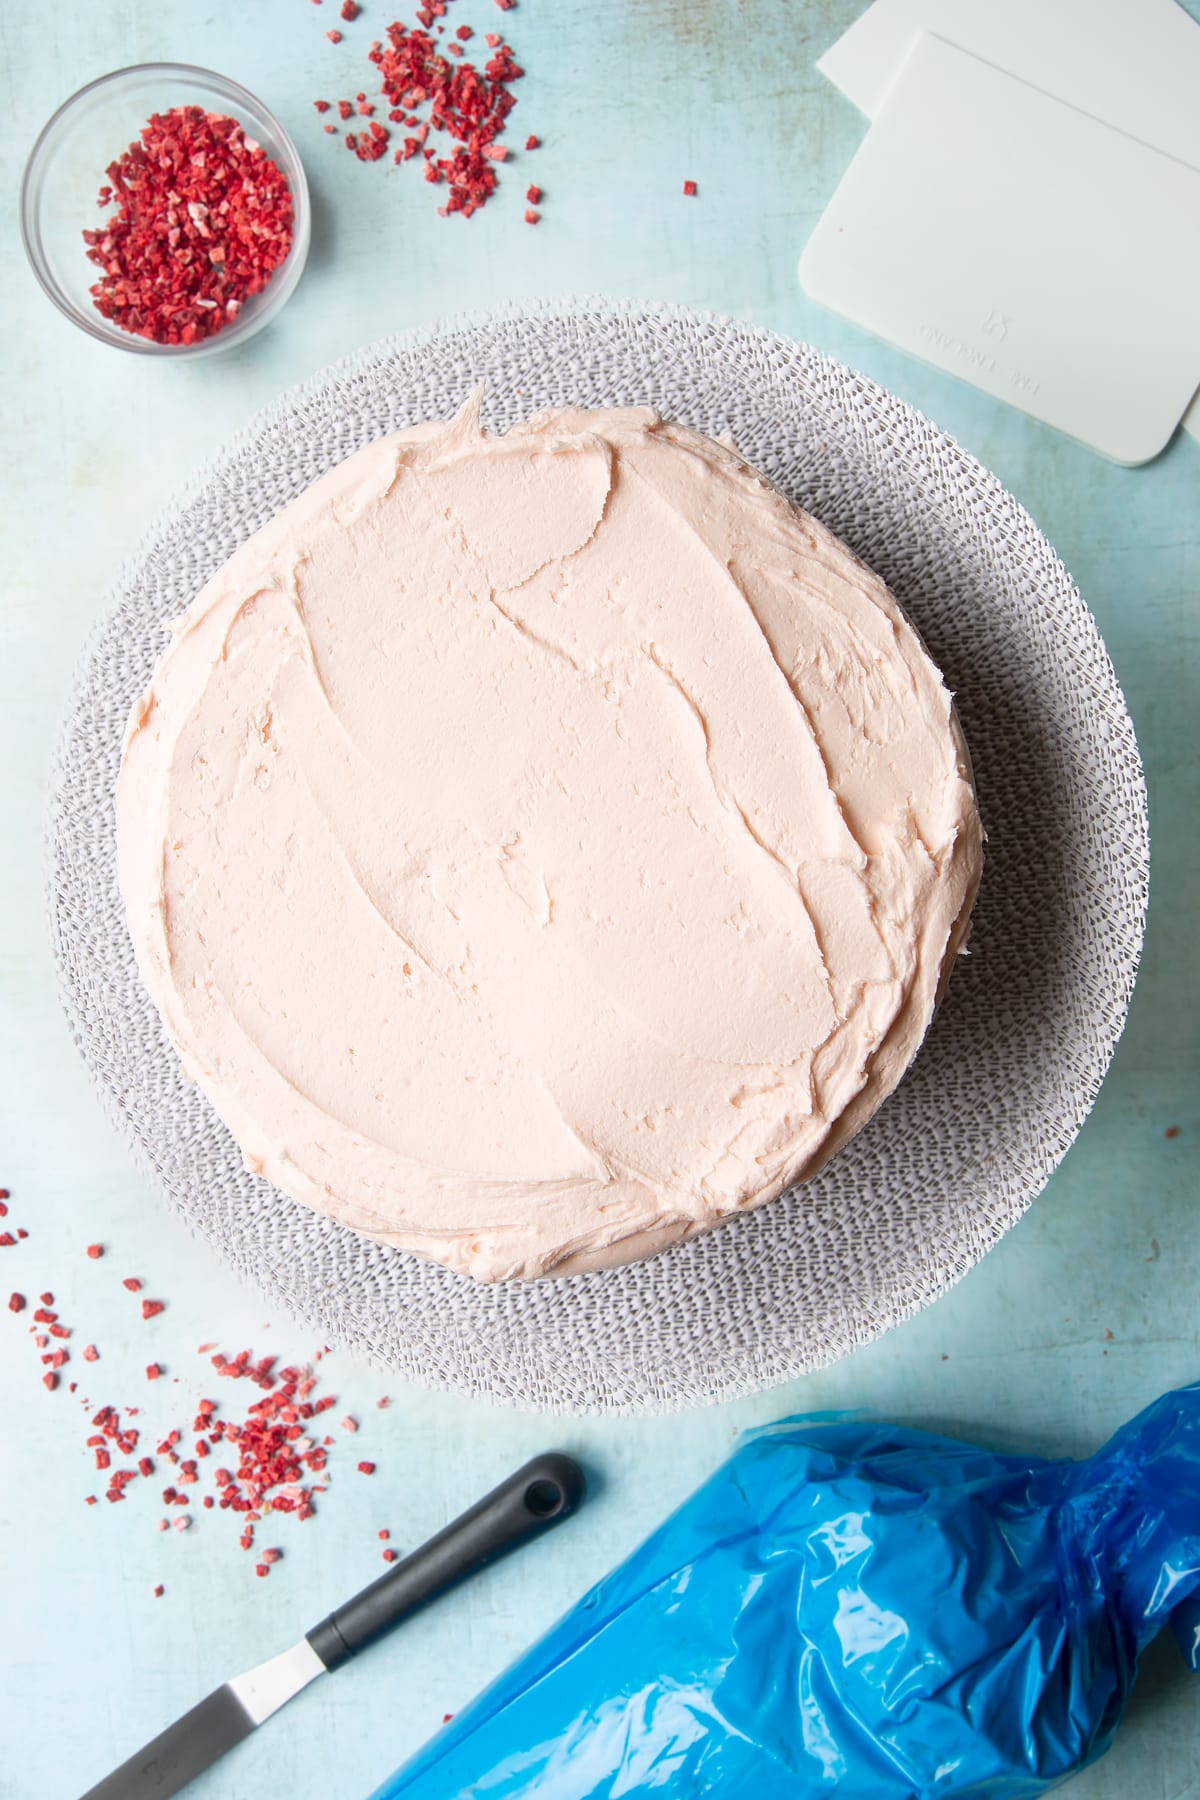 The first two layer of a pink ombre cake (the brightest and mid pink shade) on a cake turntable, with pale pink frosting sandwiched between and on top of them.